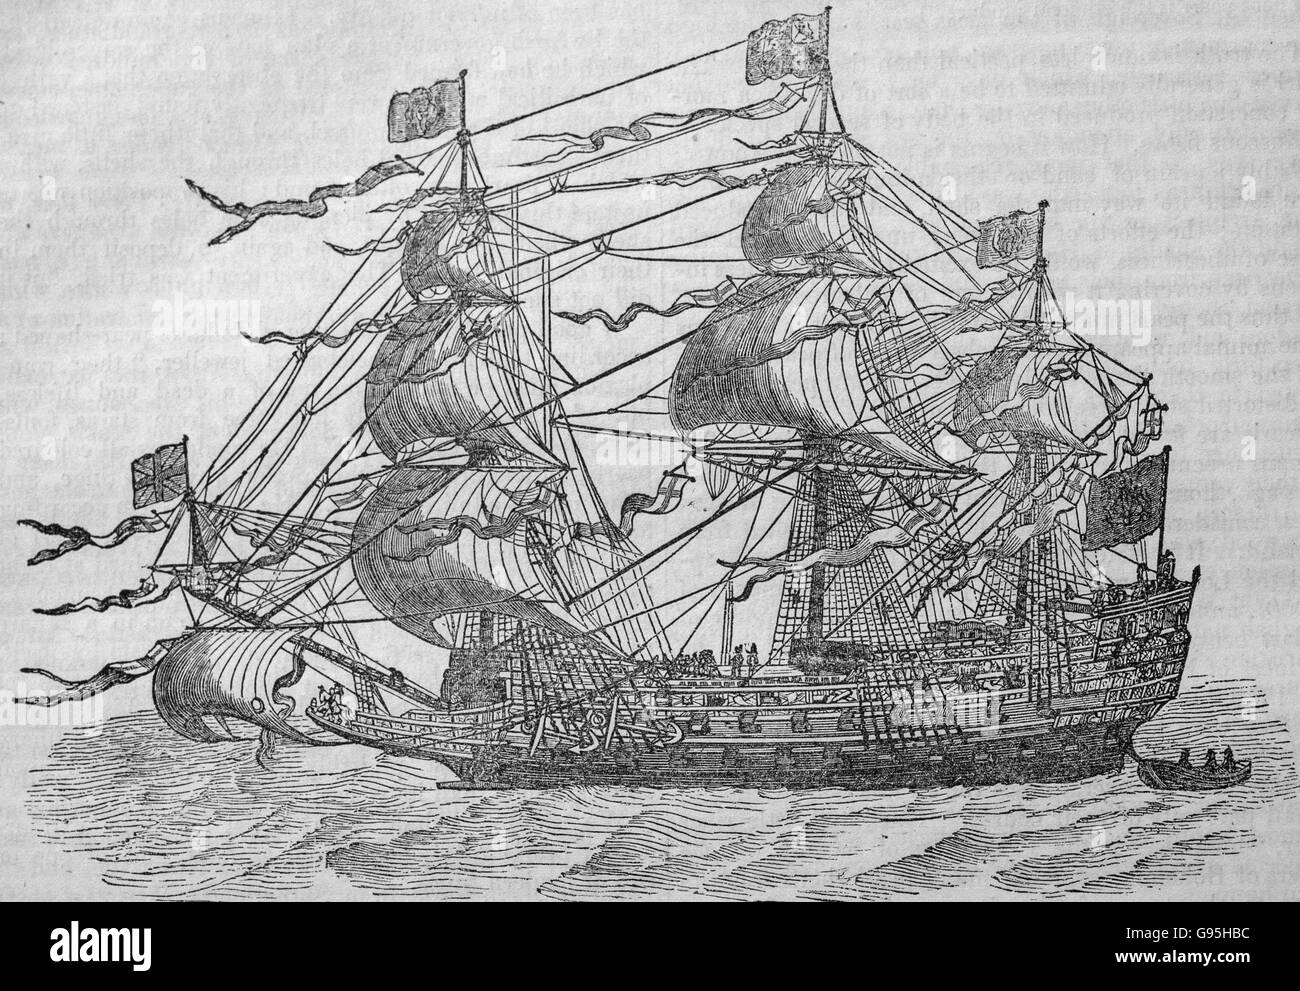 'The Sovereign of the Seas', from a mid 19th century engraving. A British Navy ship, built in 1637 at Woolwich, England. Stock Photo